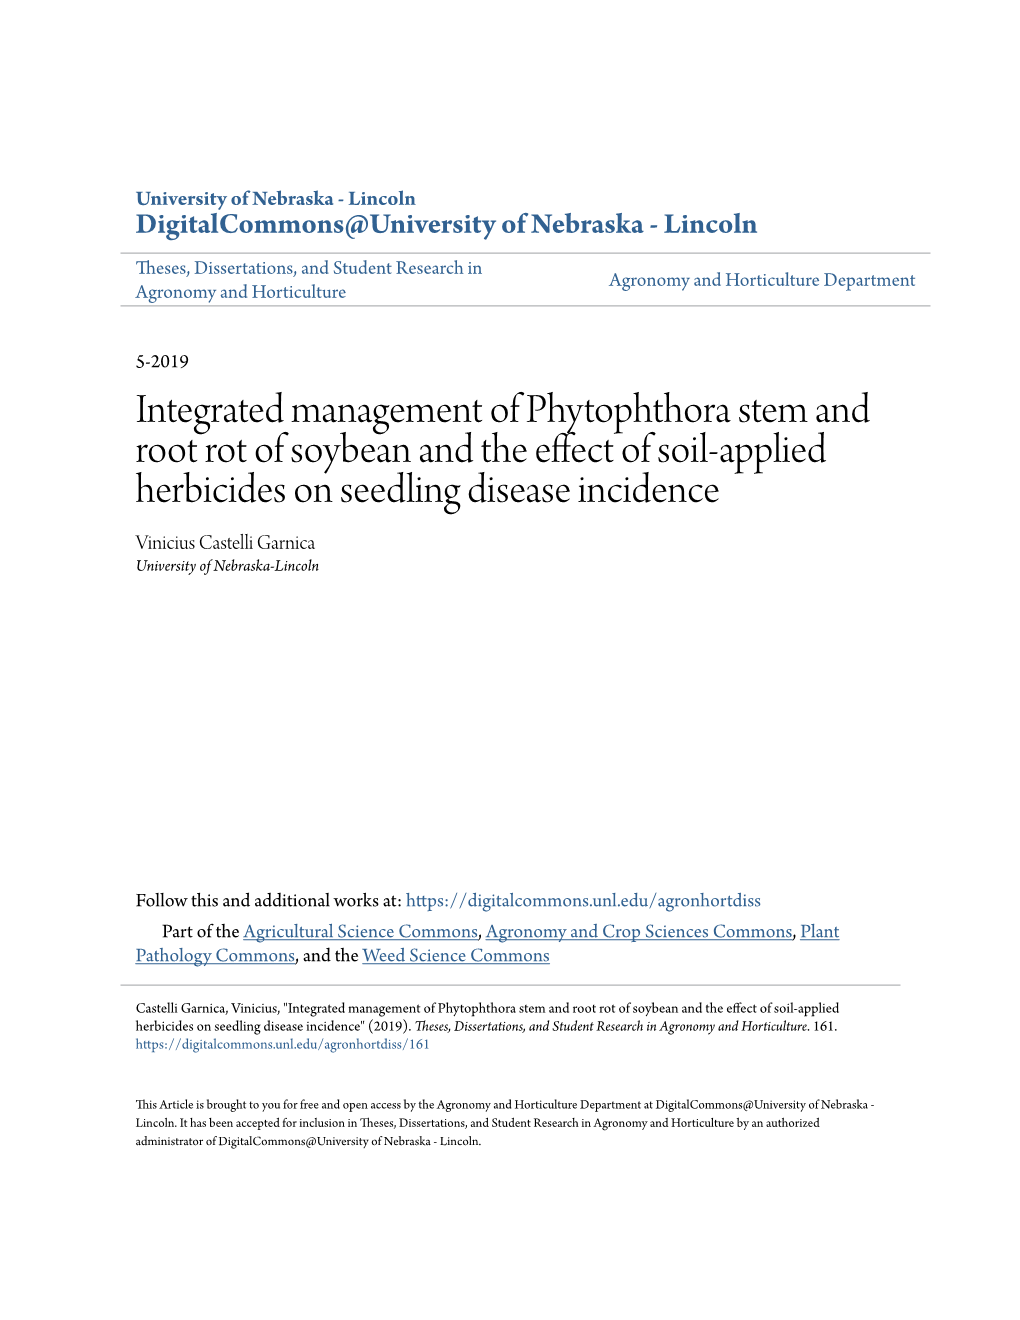 Integrated Management of Phytophthora Stem and Root Rot Of